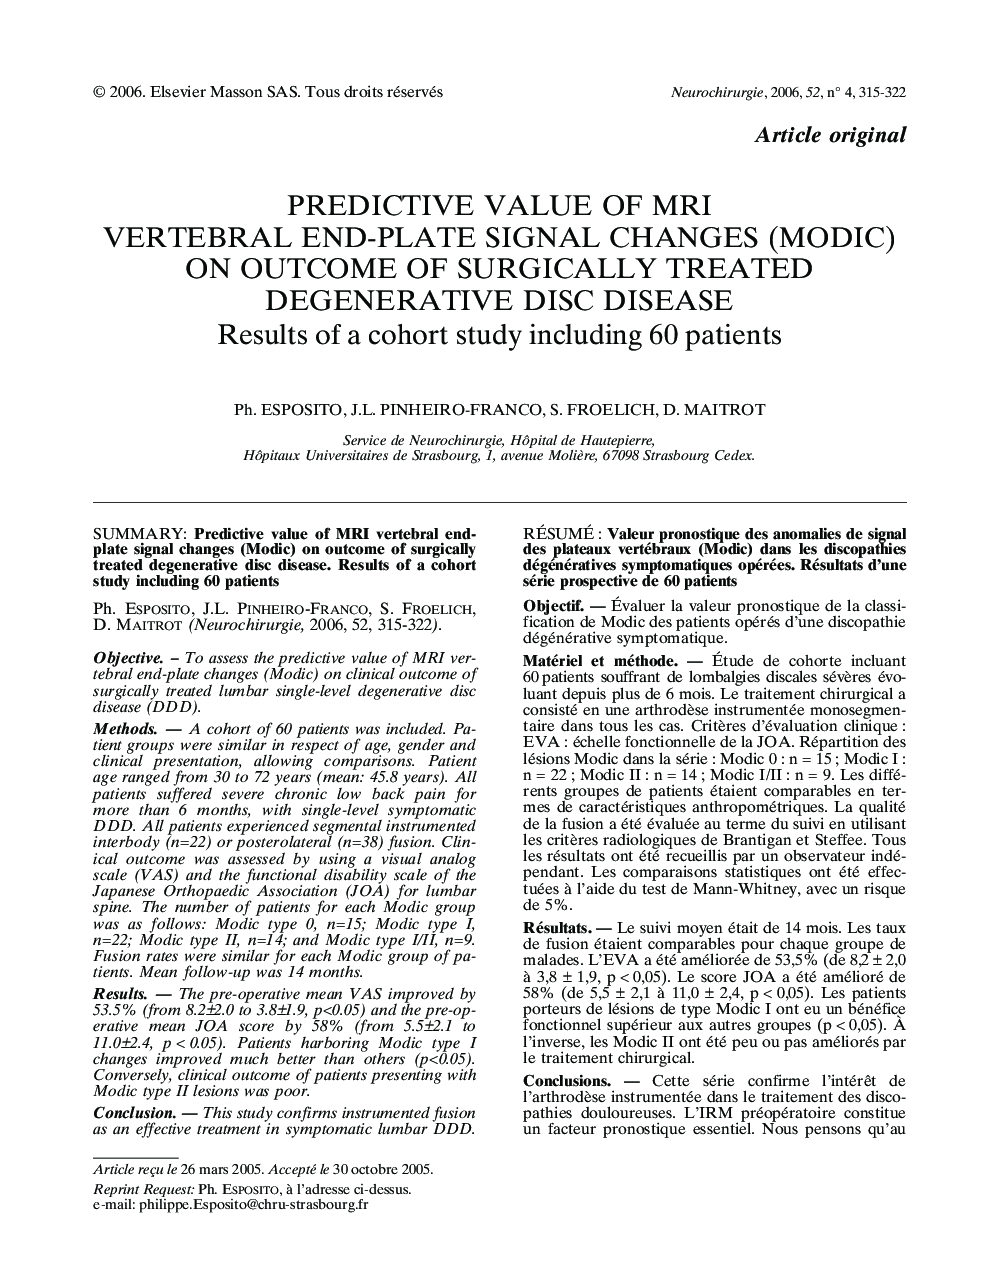 Predictive value of MRI vertebral end-plate signal changes (MODIC) on outcome of surgically treated degenerative disc disease